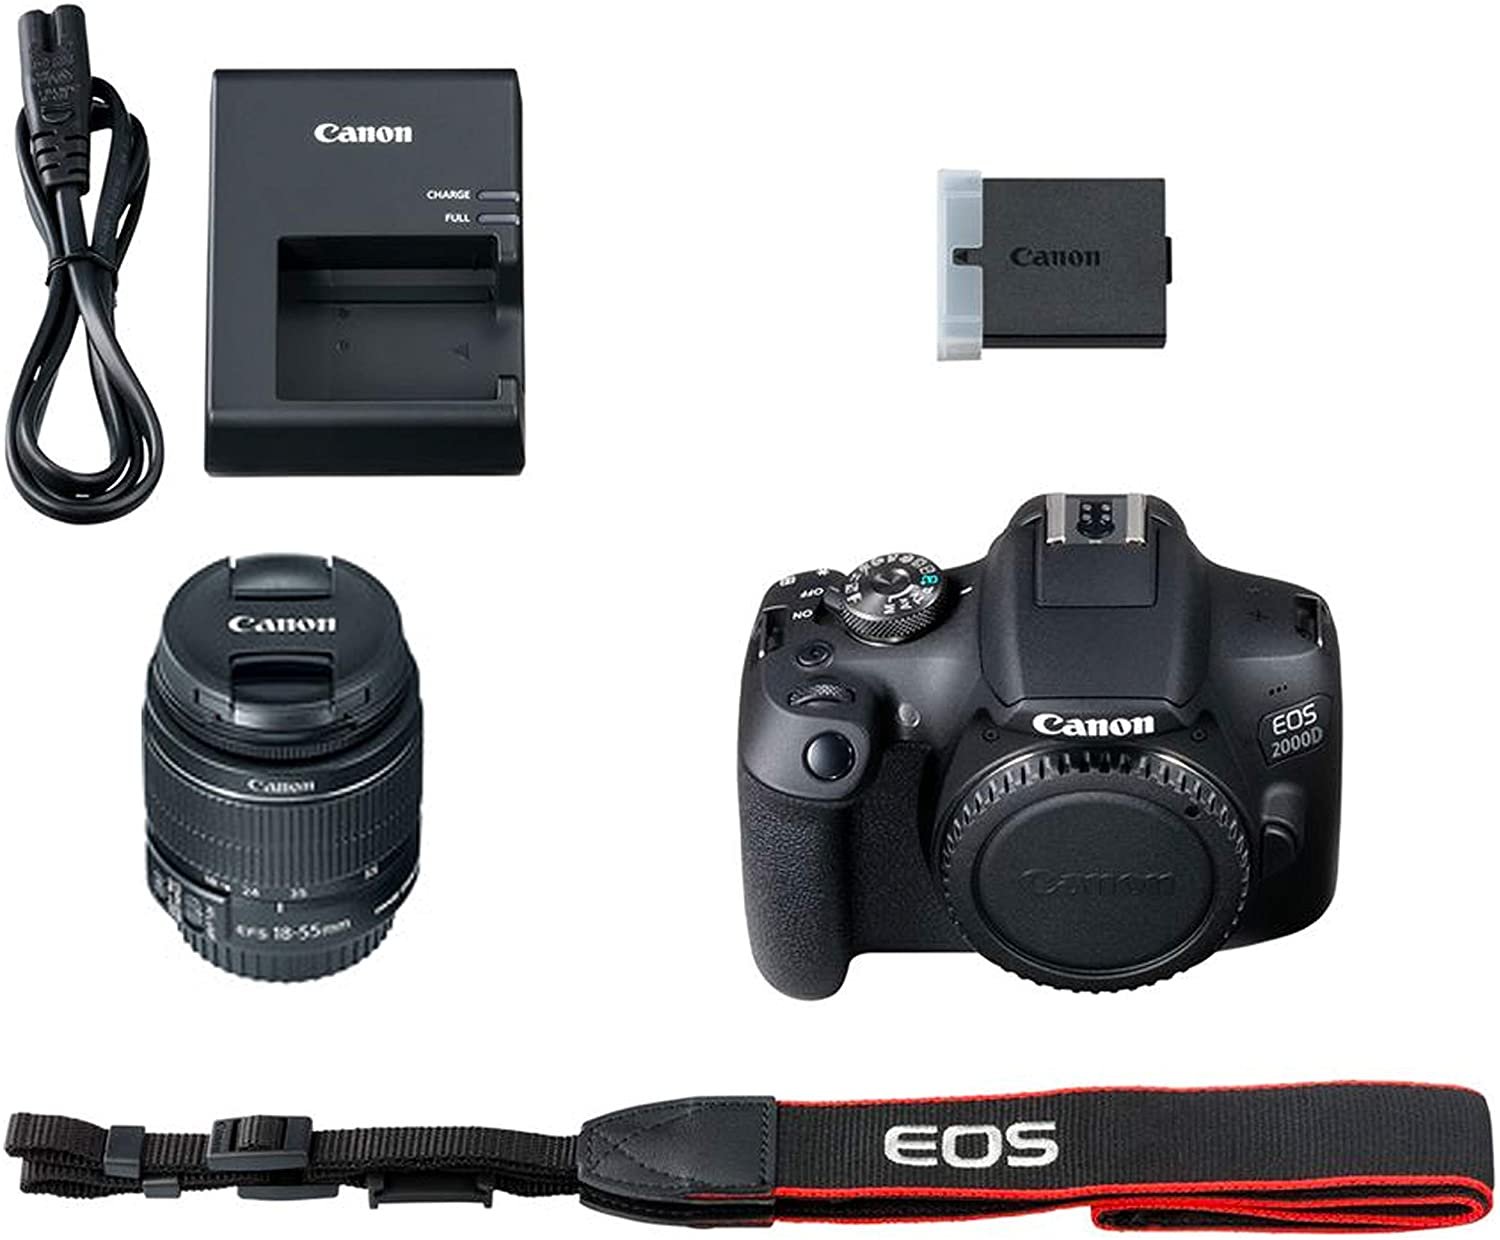 Canon EOS 2000D (Rebel T7) DSLR Camera with 18-55mm f/3.5-5.6 Zoom Lens, 64GB Memory,Case, Tripod and More (28pc Bundle) - image 4 of 8